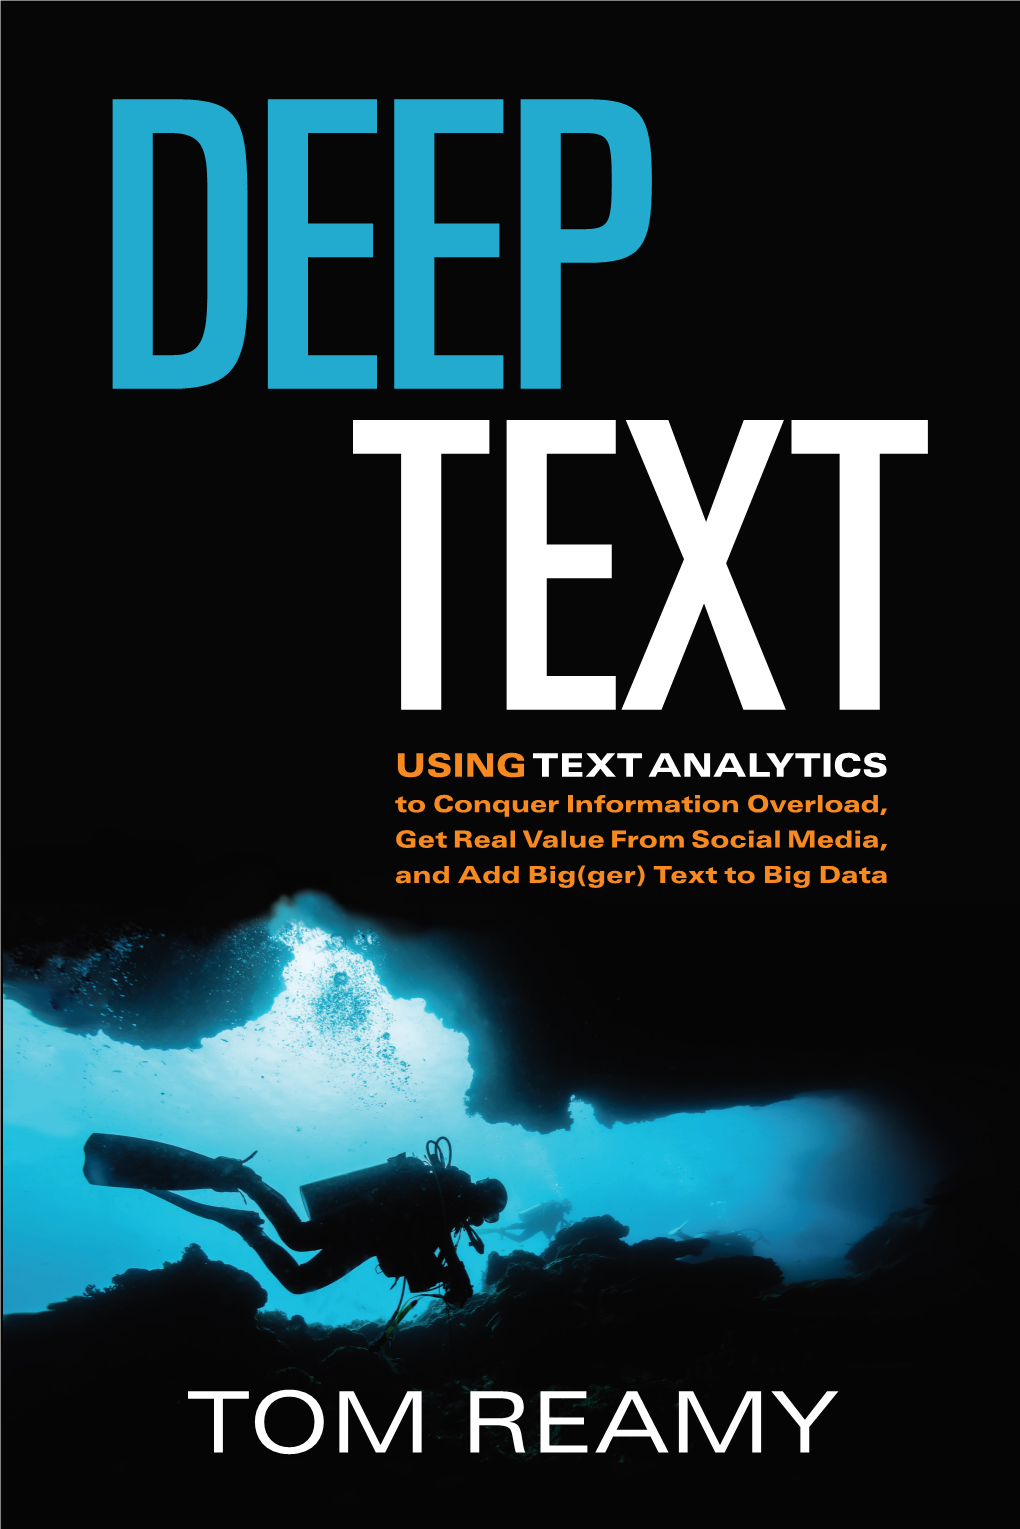 Deep Text Is an Approach to Text Analytics That Adds Depth and Intelligence to Our Ability to Utilize a Growing Mass of Unstructured Text